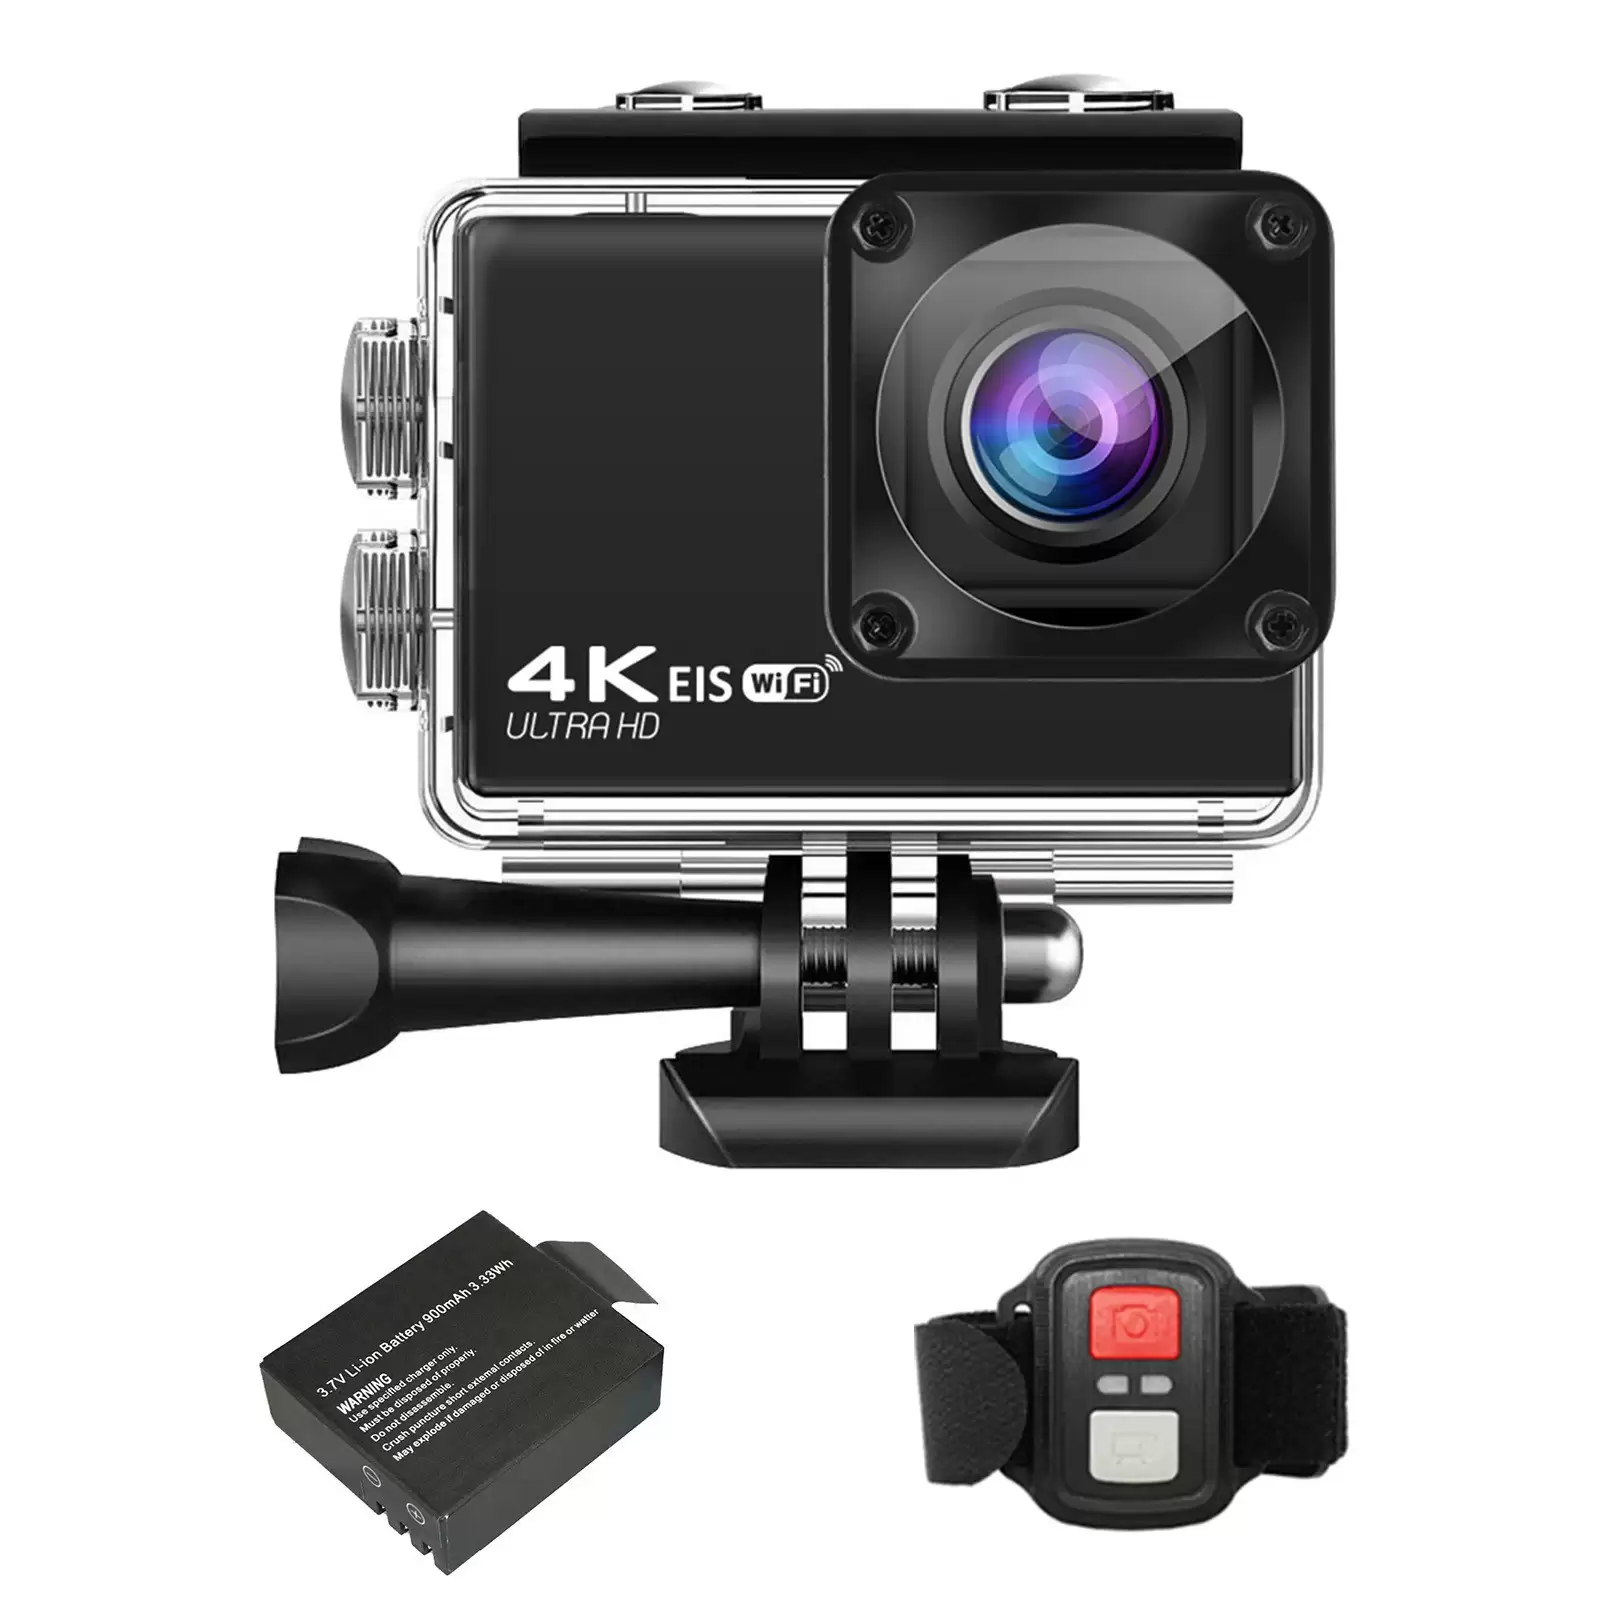 Get Extra 51% Discount On 4k/30fps 24mp Ultra Hd Sports Action Camera, Limited Offers $49.99 With This Discount Coupon At Tomtop